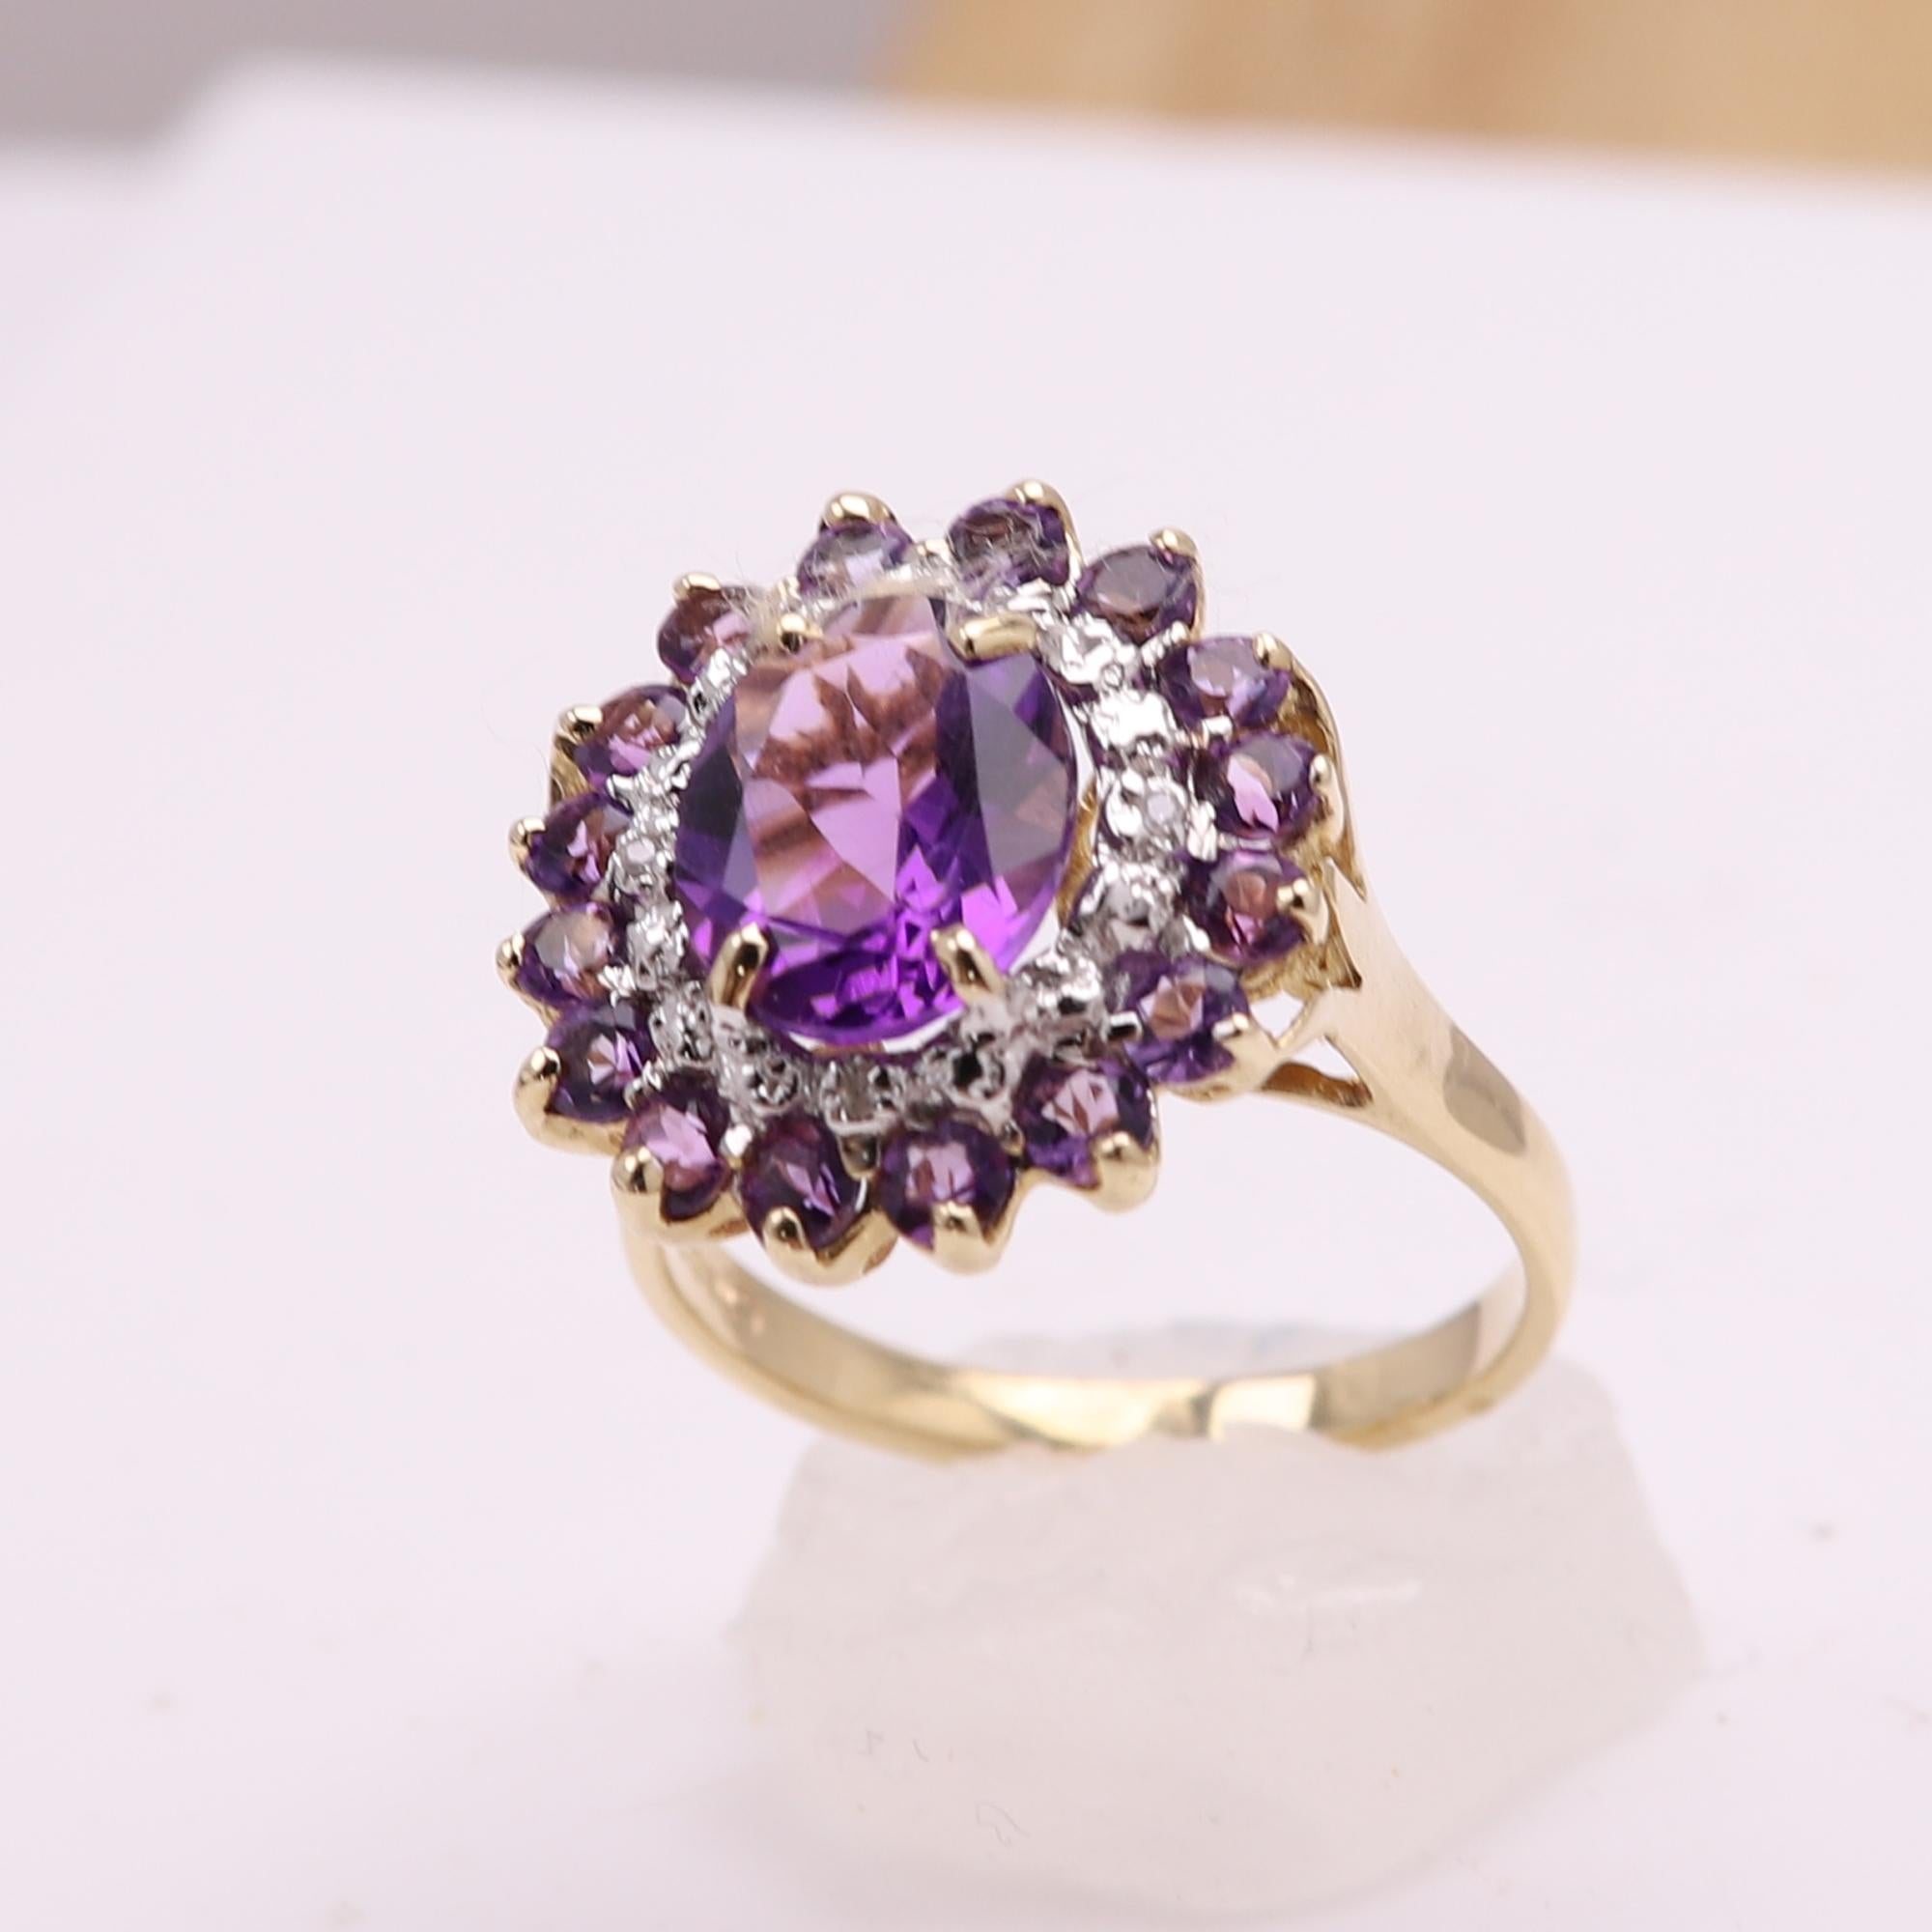 Amethyst Large Cocktail Ring 10 Karat Yellow Gold  Statement Ring In Excellent Condition For Sale In Brooklyn, NY